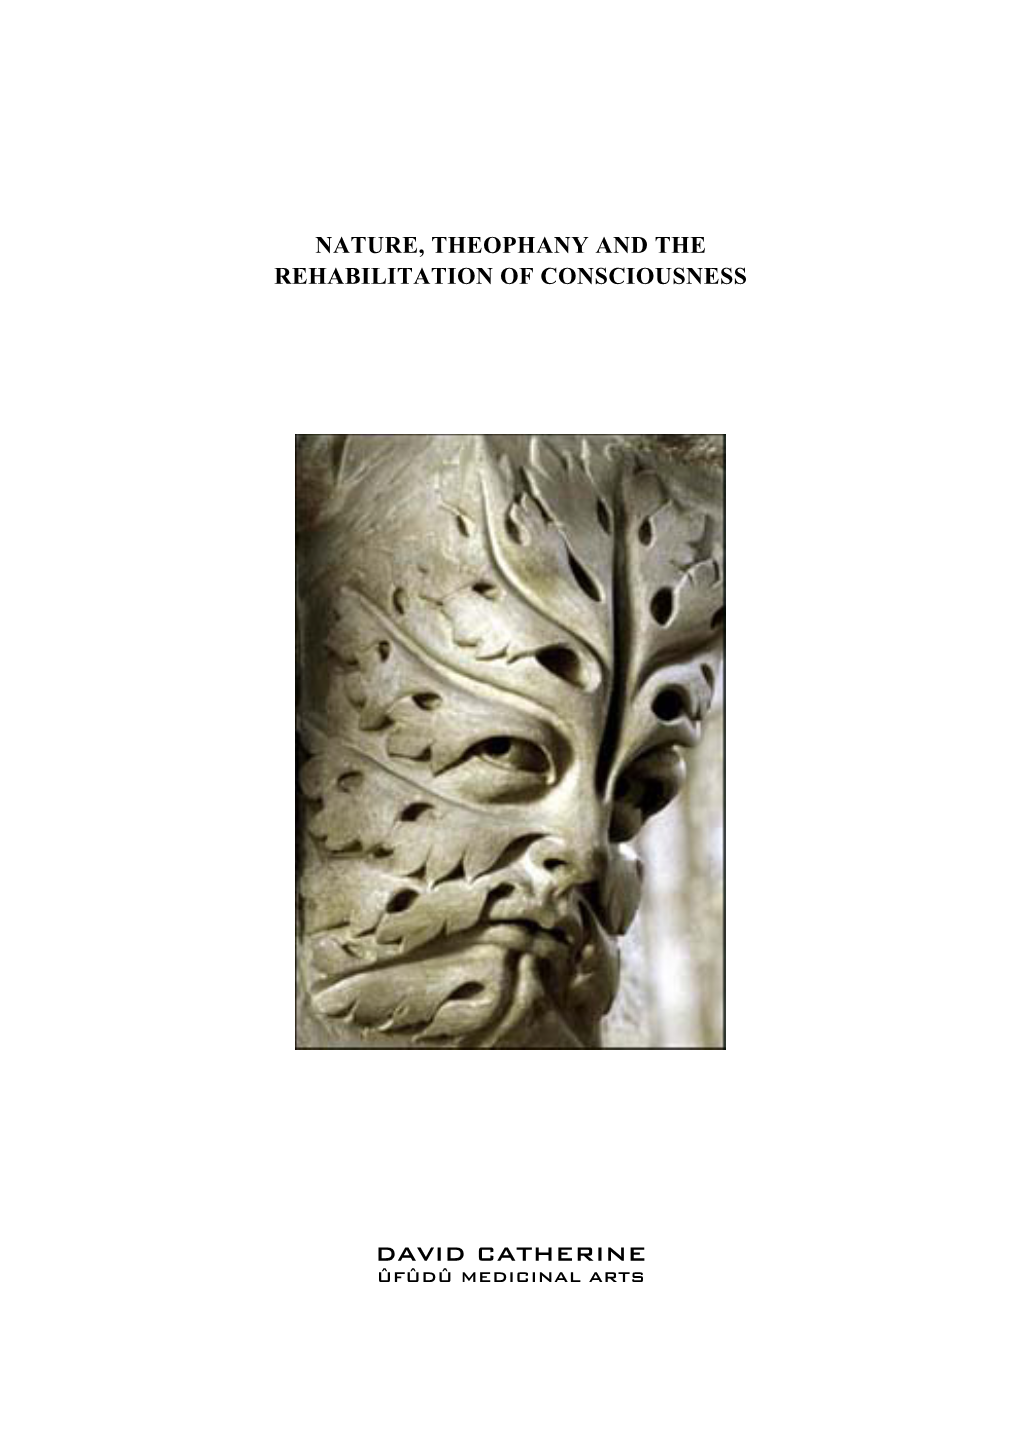 Nature, Theophany and the Rehabilitation of Consciousness